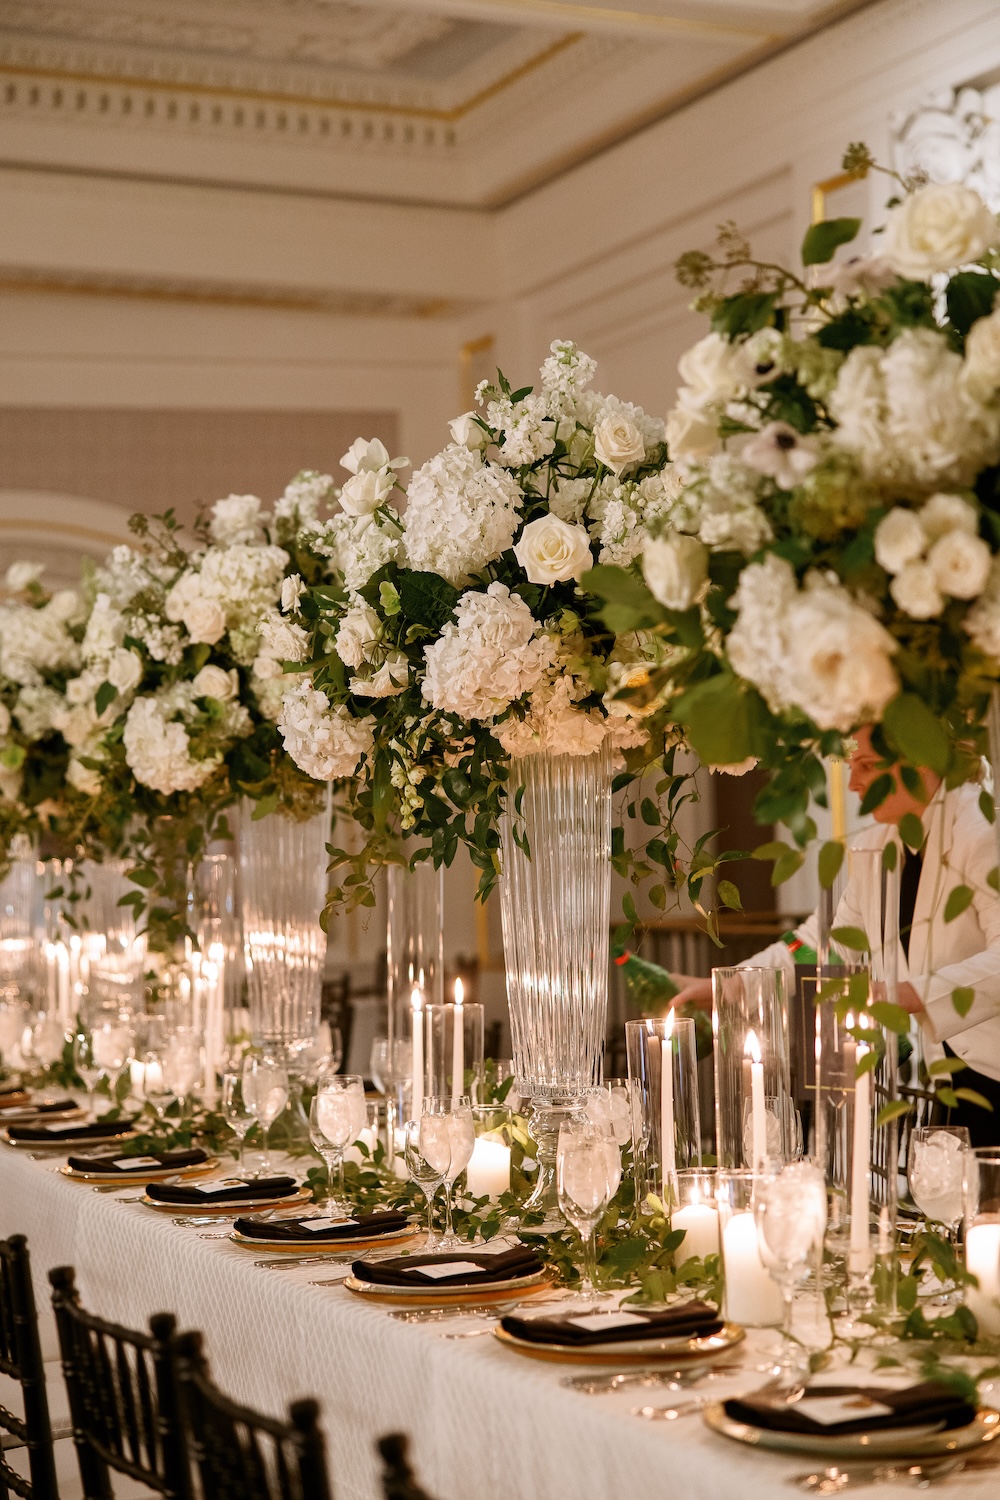 Tall lush floral centerpieces, white and green, candles. Elegant modern decor. Modern Washington DC wedding at National Museum of Women in the Arts. Sarah Bradshaw Photography.